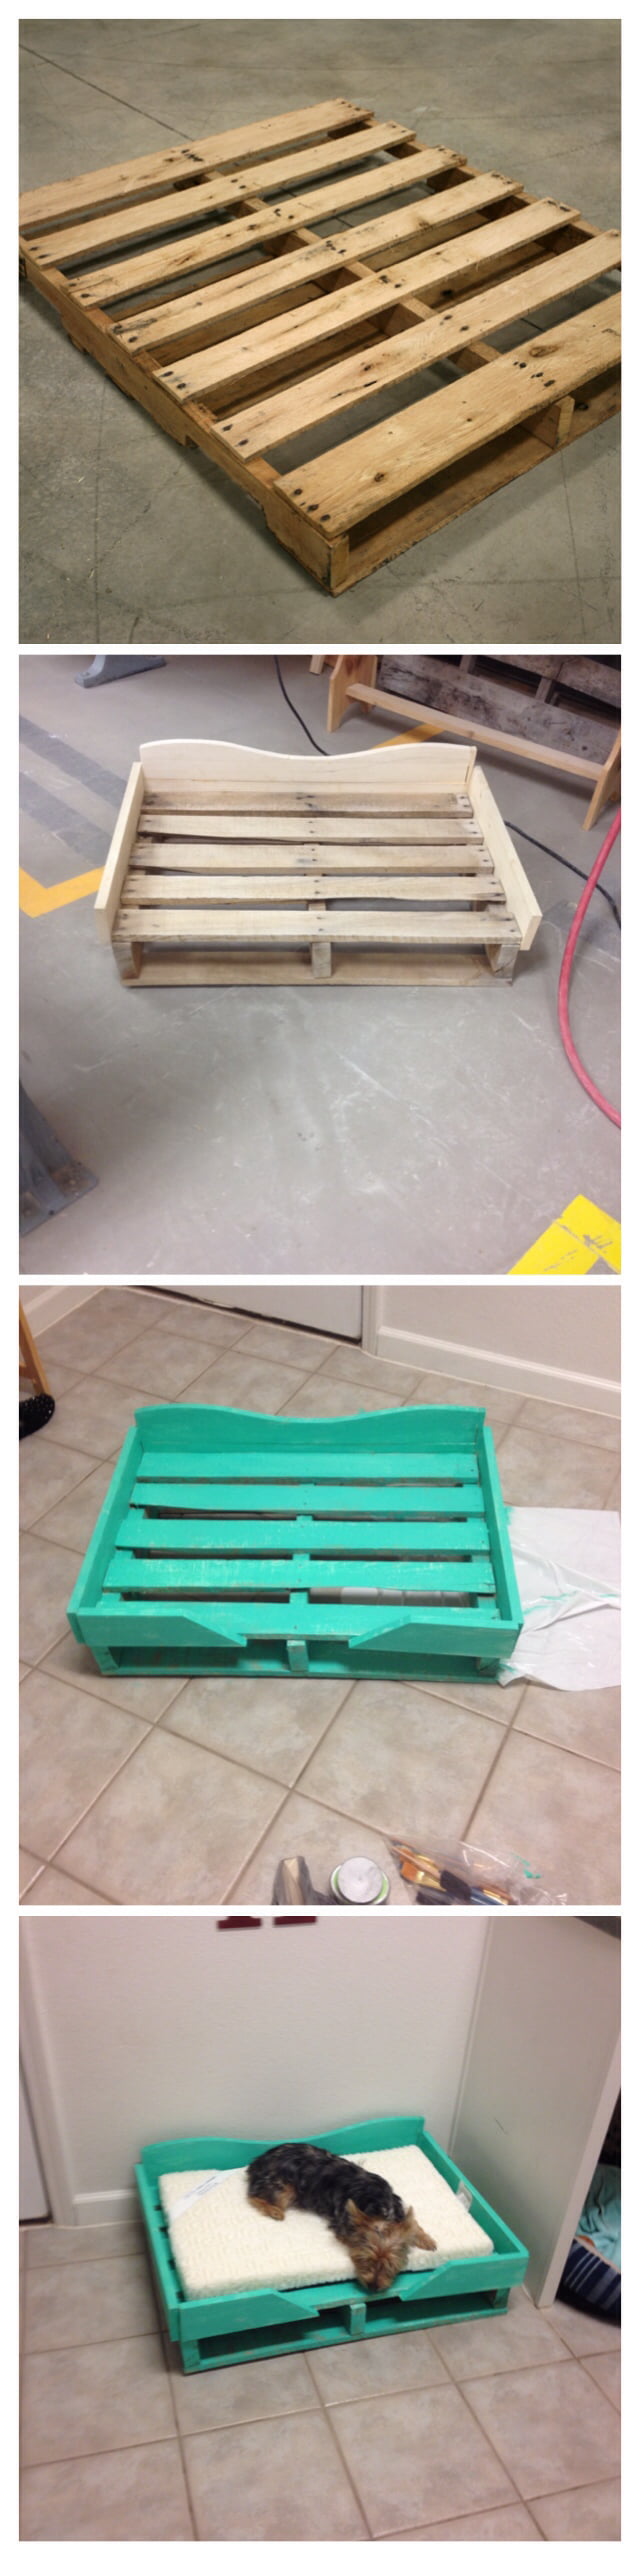 Up-cycled Pallet Project: Dog Bed